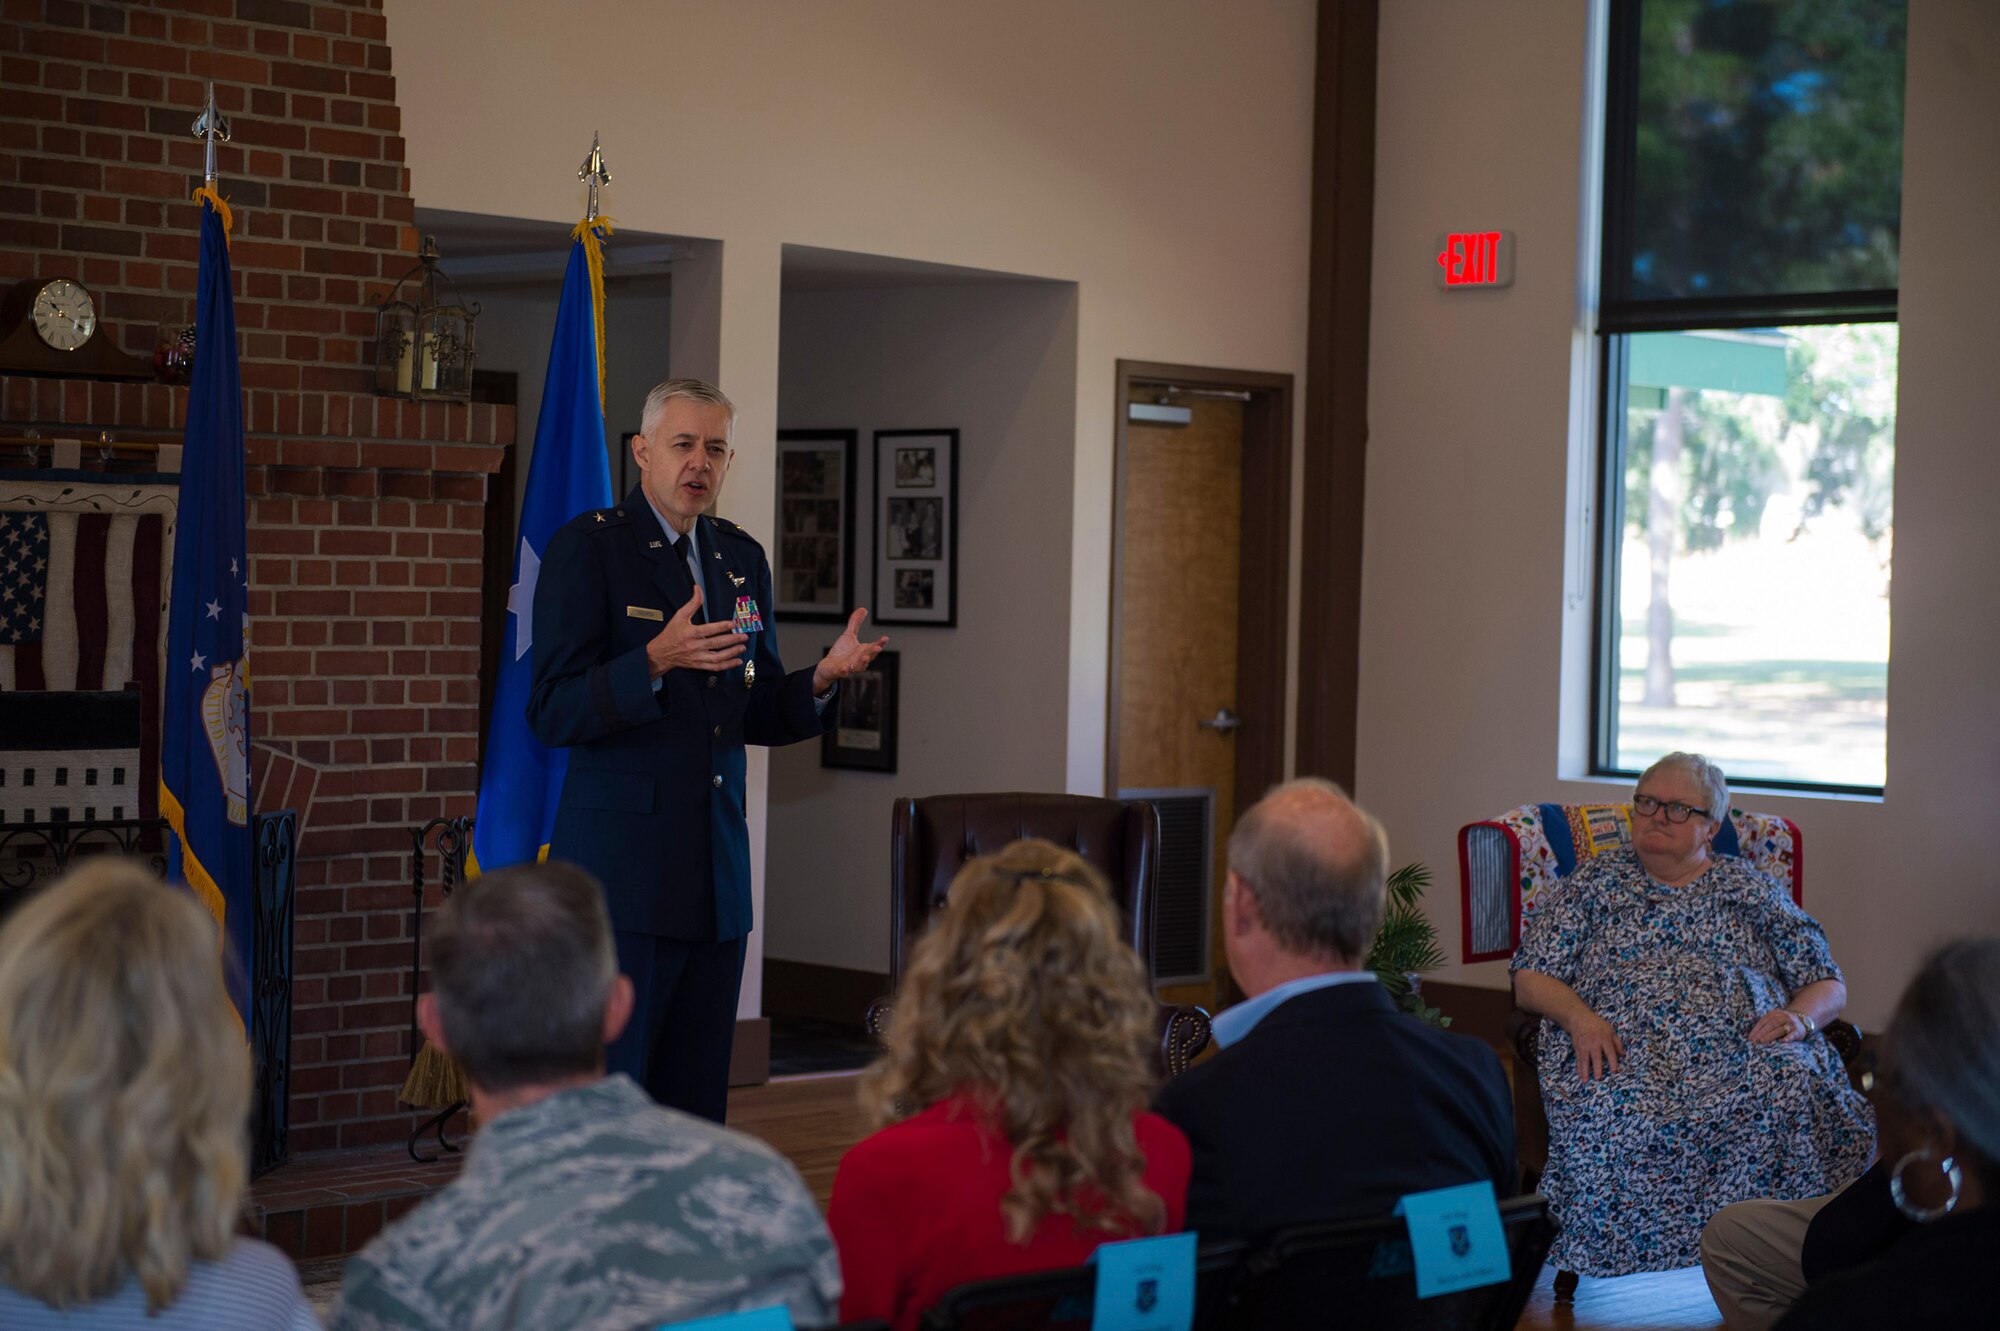 U.S. Air Force Retired Brigadier General Kenneth Todorov, former 23d Wing commander, gives remarks during Ann Lukens’, 23d Force Support Squadron school liaison officer, retirement ceremony, Sept. 30, 2016, at Moody Air Force Base, Ga. Todorov presided over the ceremony and commended Lukens for her contributions to the Team Moody community. (U.S. Air Force photo by Airman 1st Class Greg Nash)